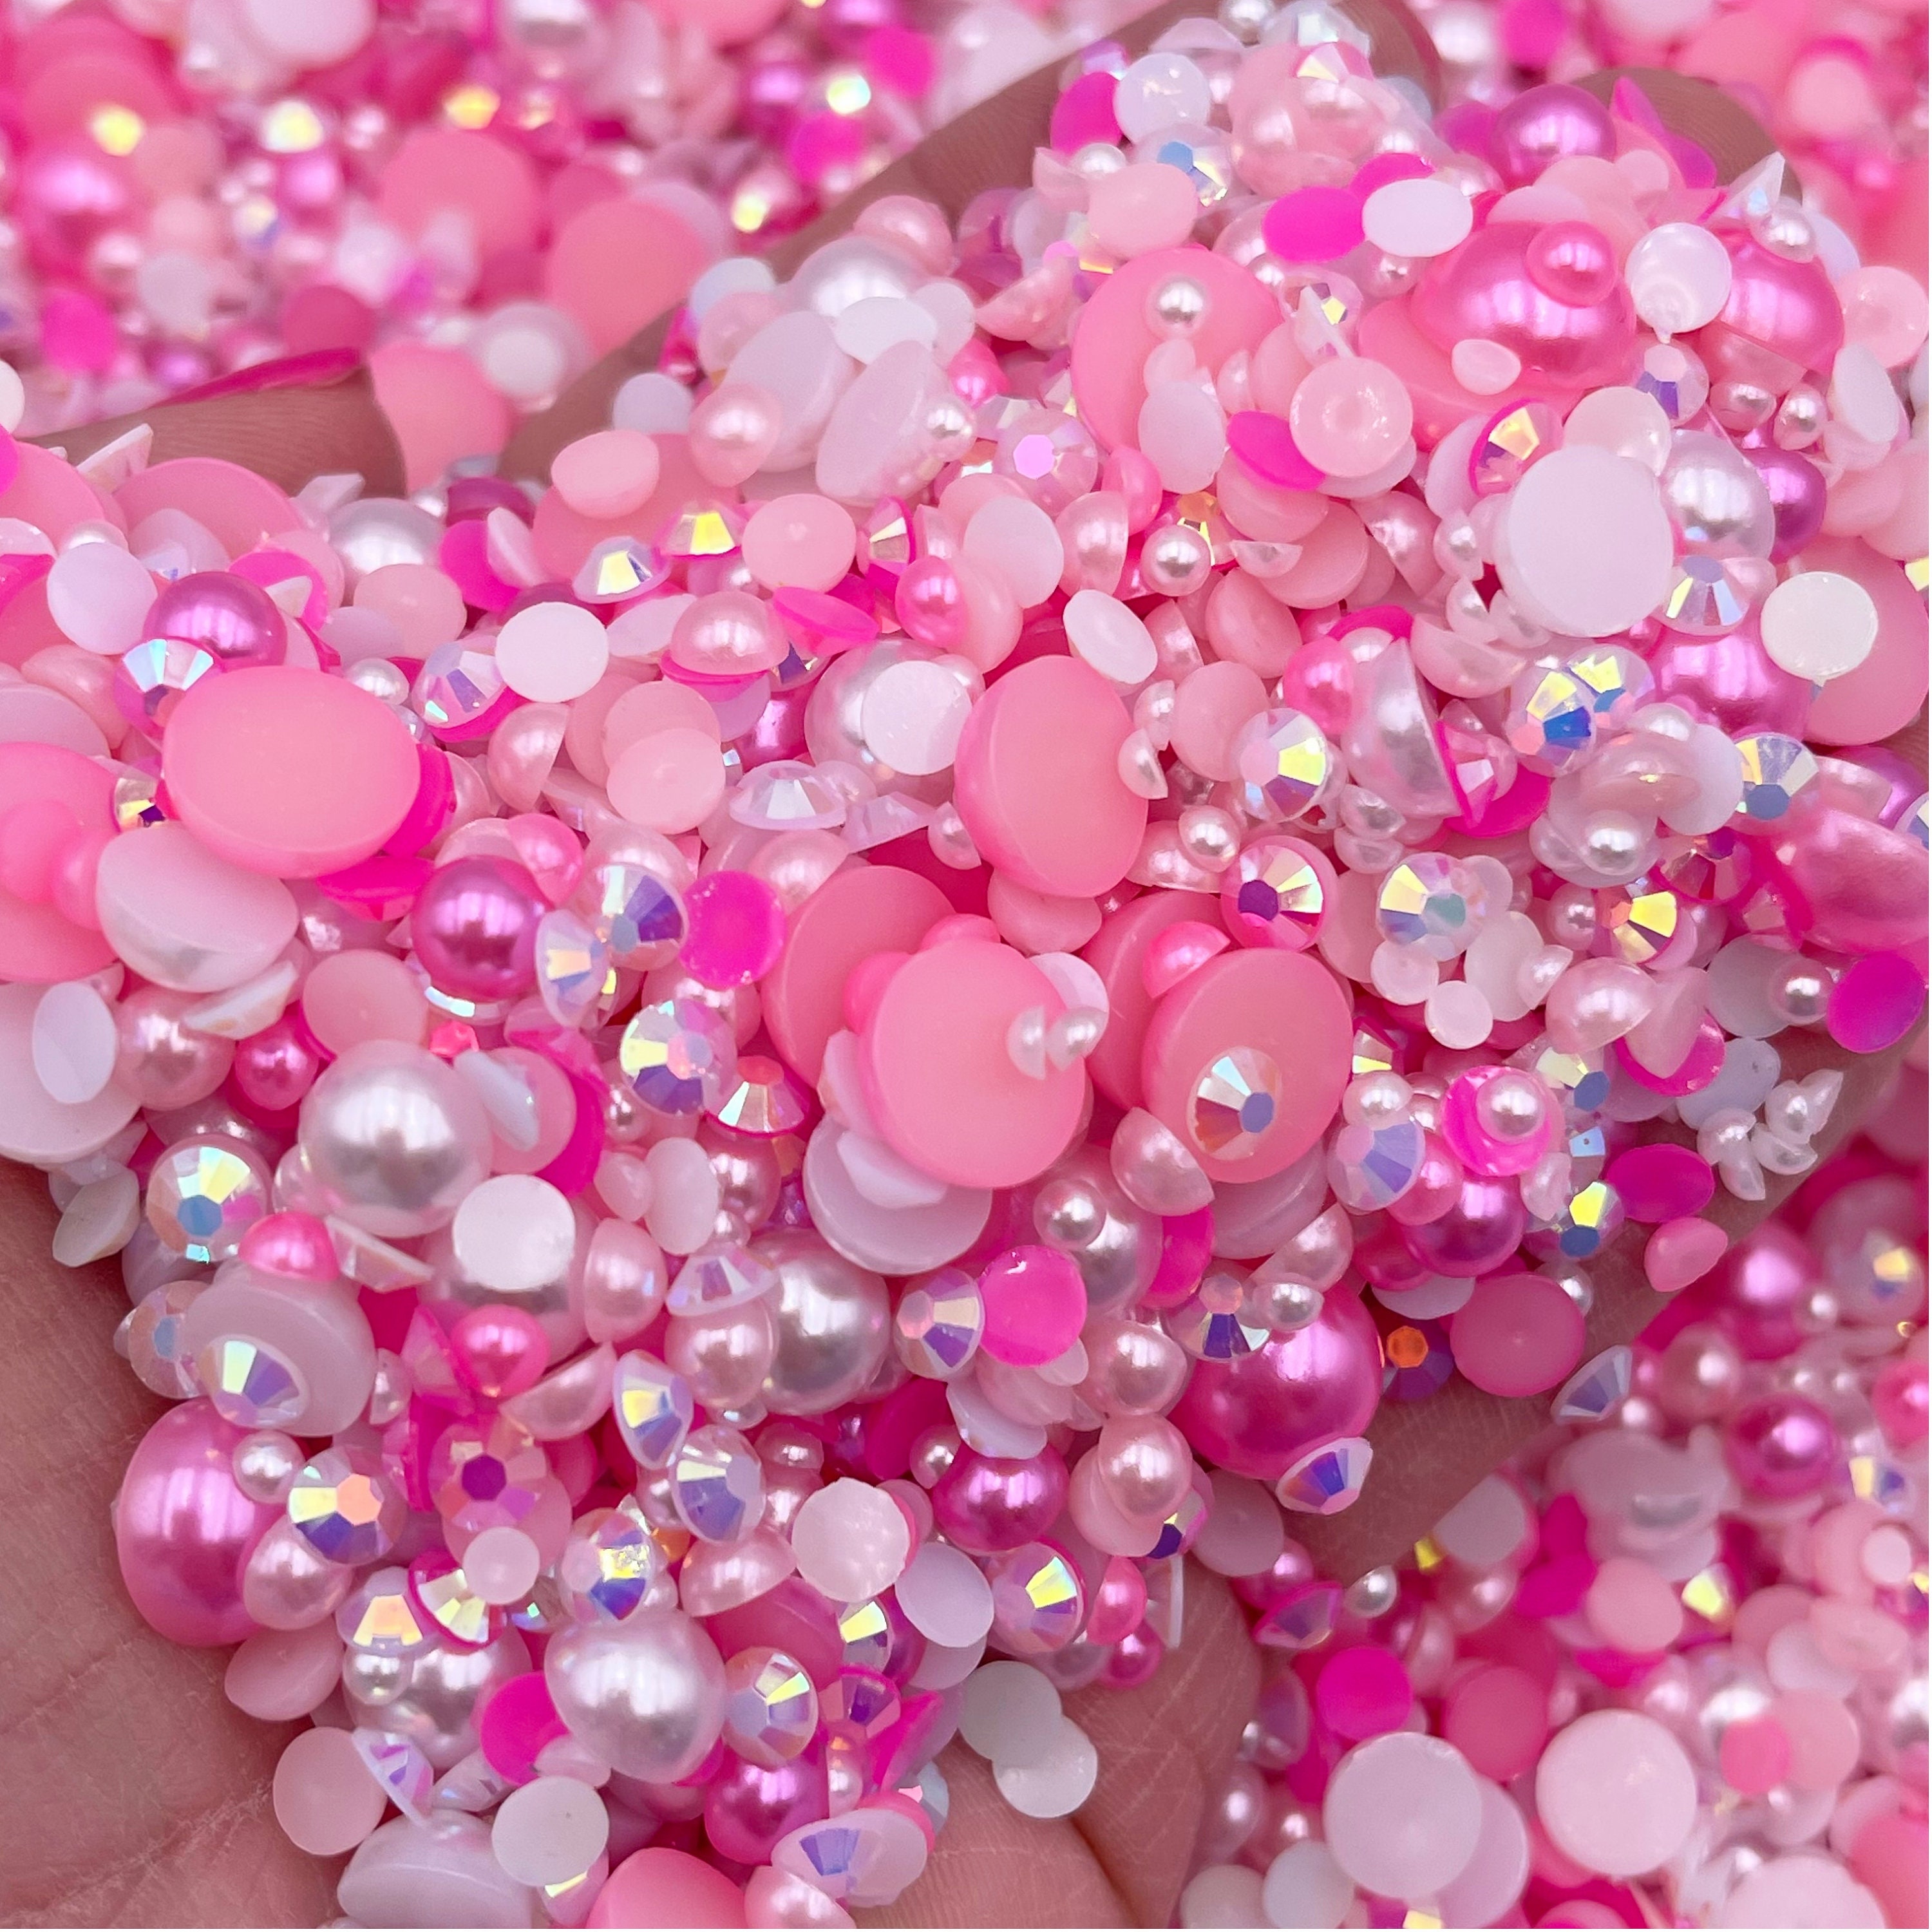 Shades of Purple Pearl Mix, Flatback Pearls and Rhinestone Mix, Sizes Range  3MM-10MM, Flatback Jelly Resin, Faux Pearls Mix, Mixed Sizes